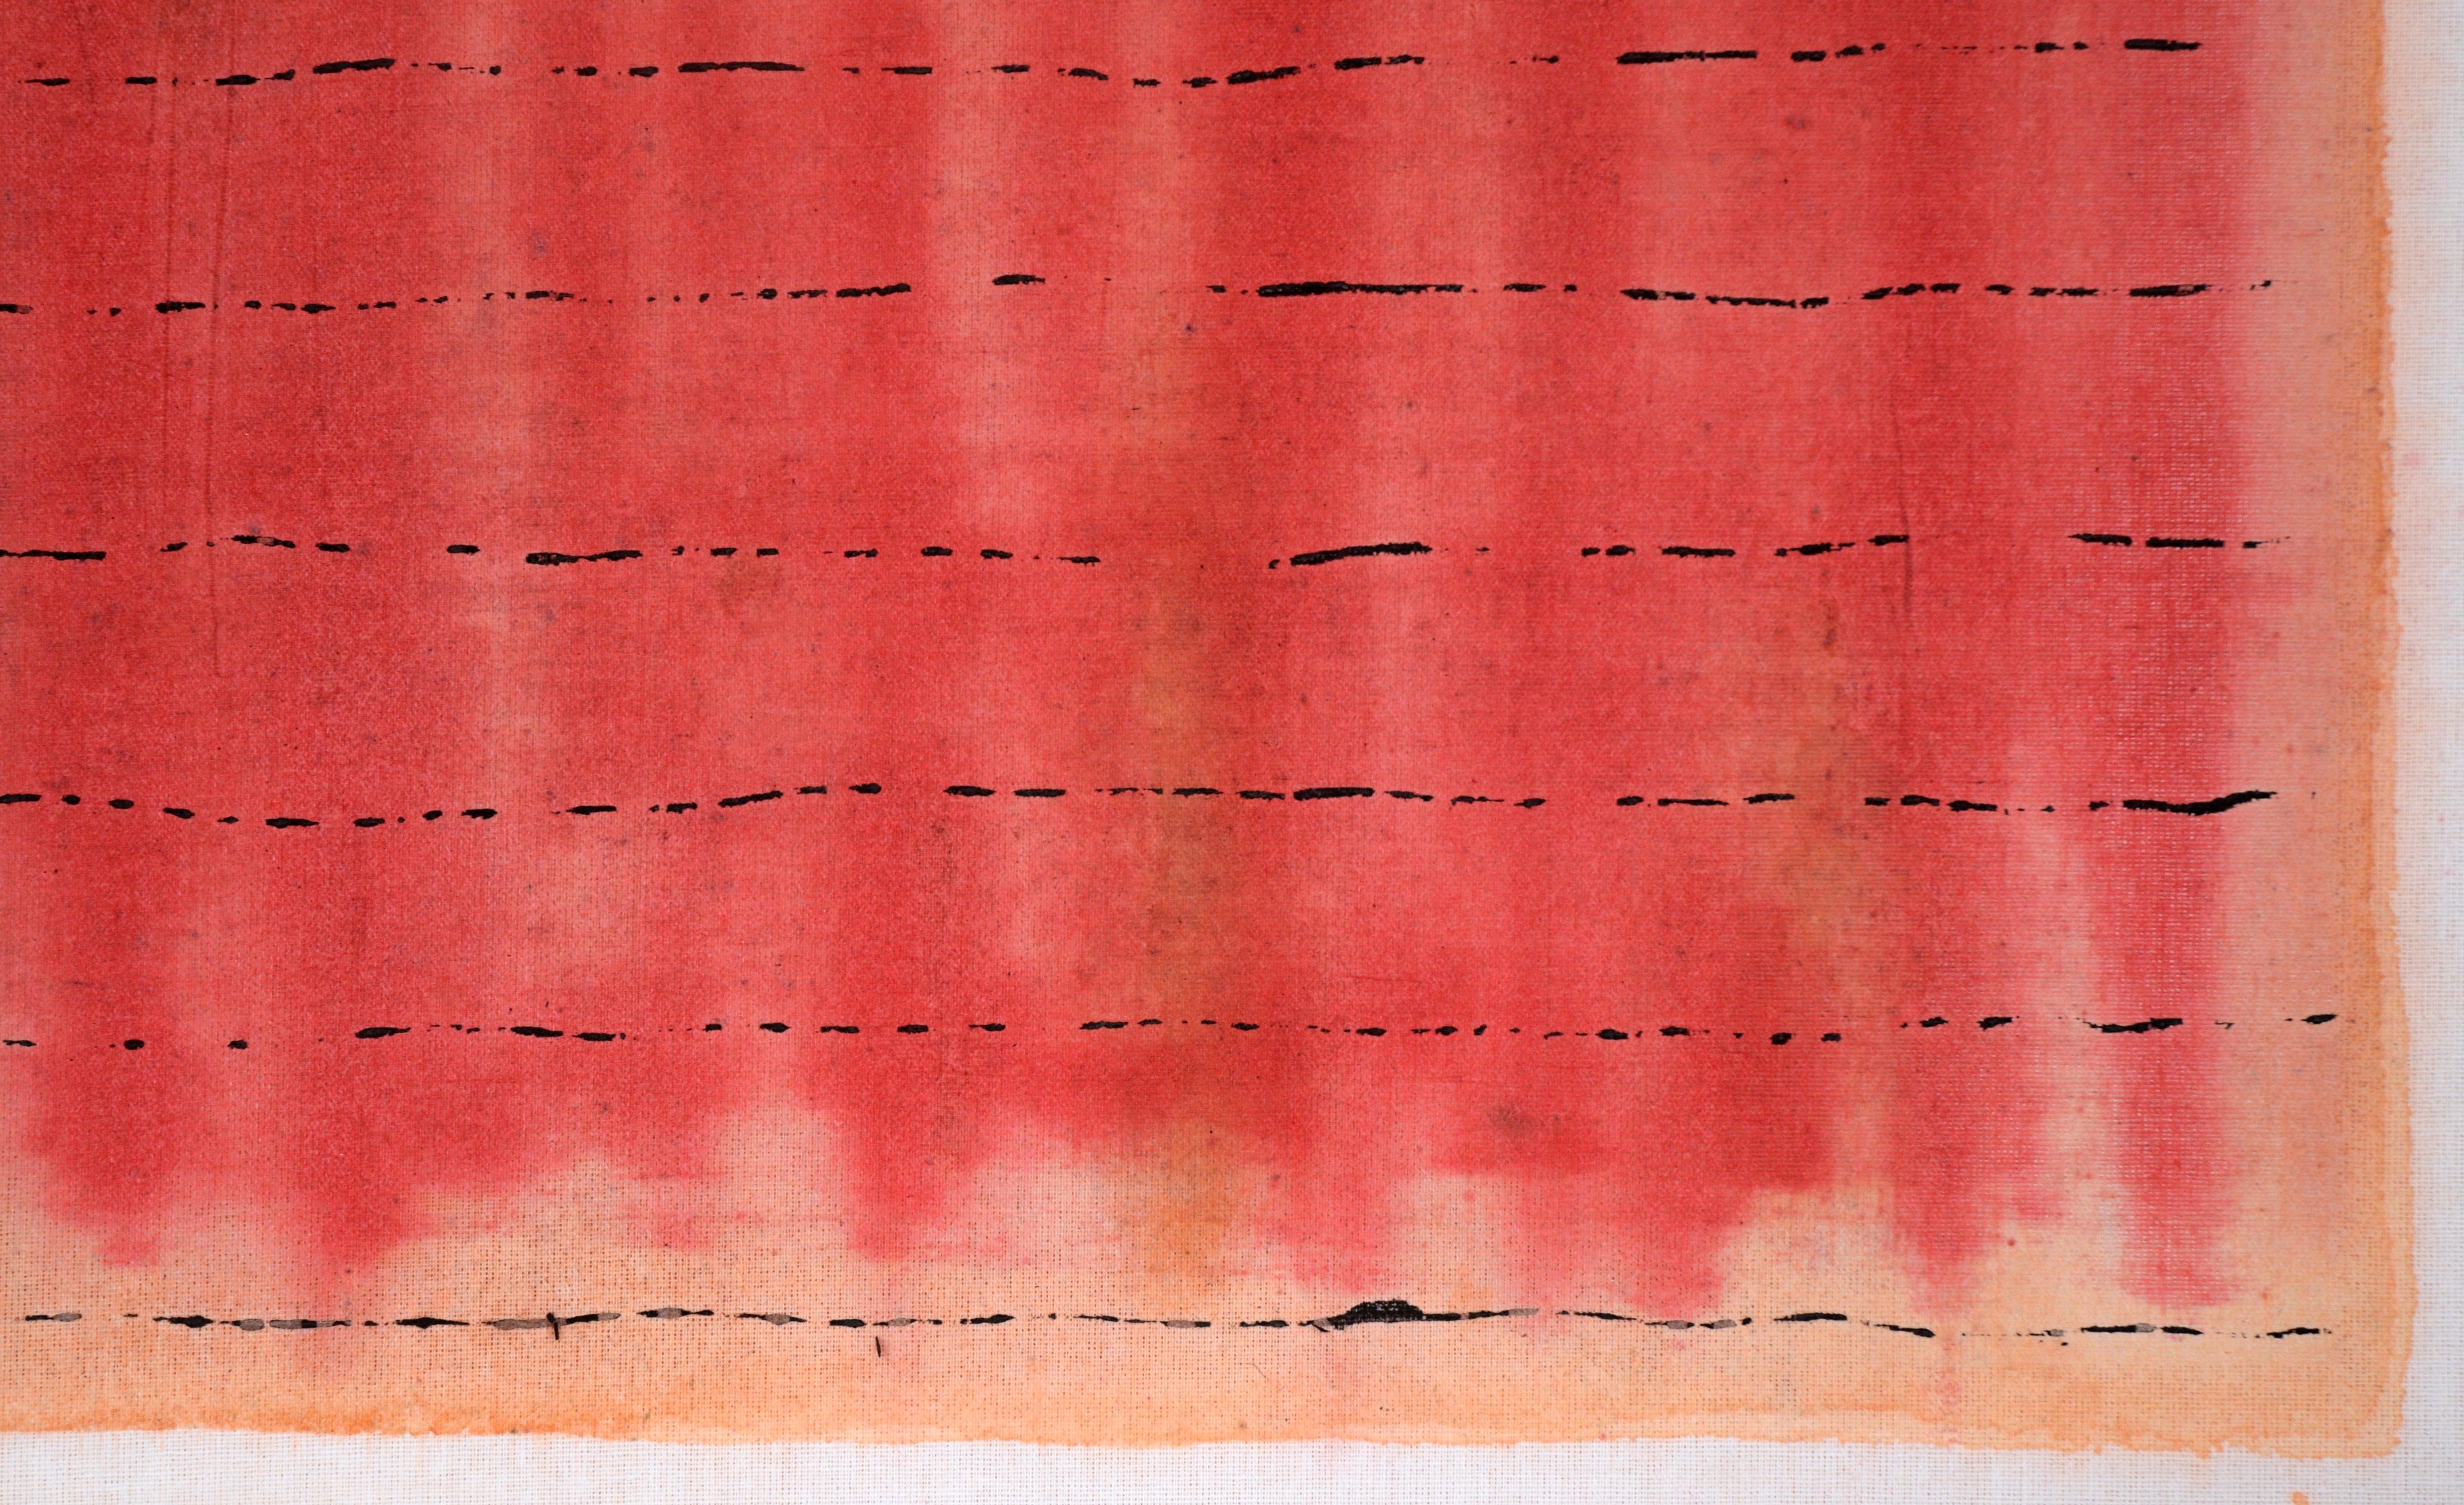 Black Lines Across a Red Field - Abstract Composition on Starched Linen 2